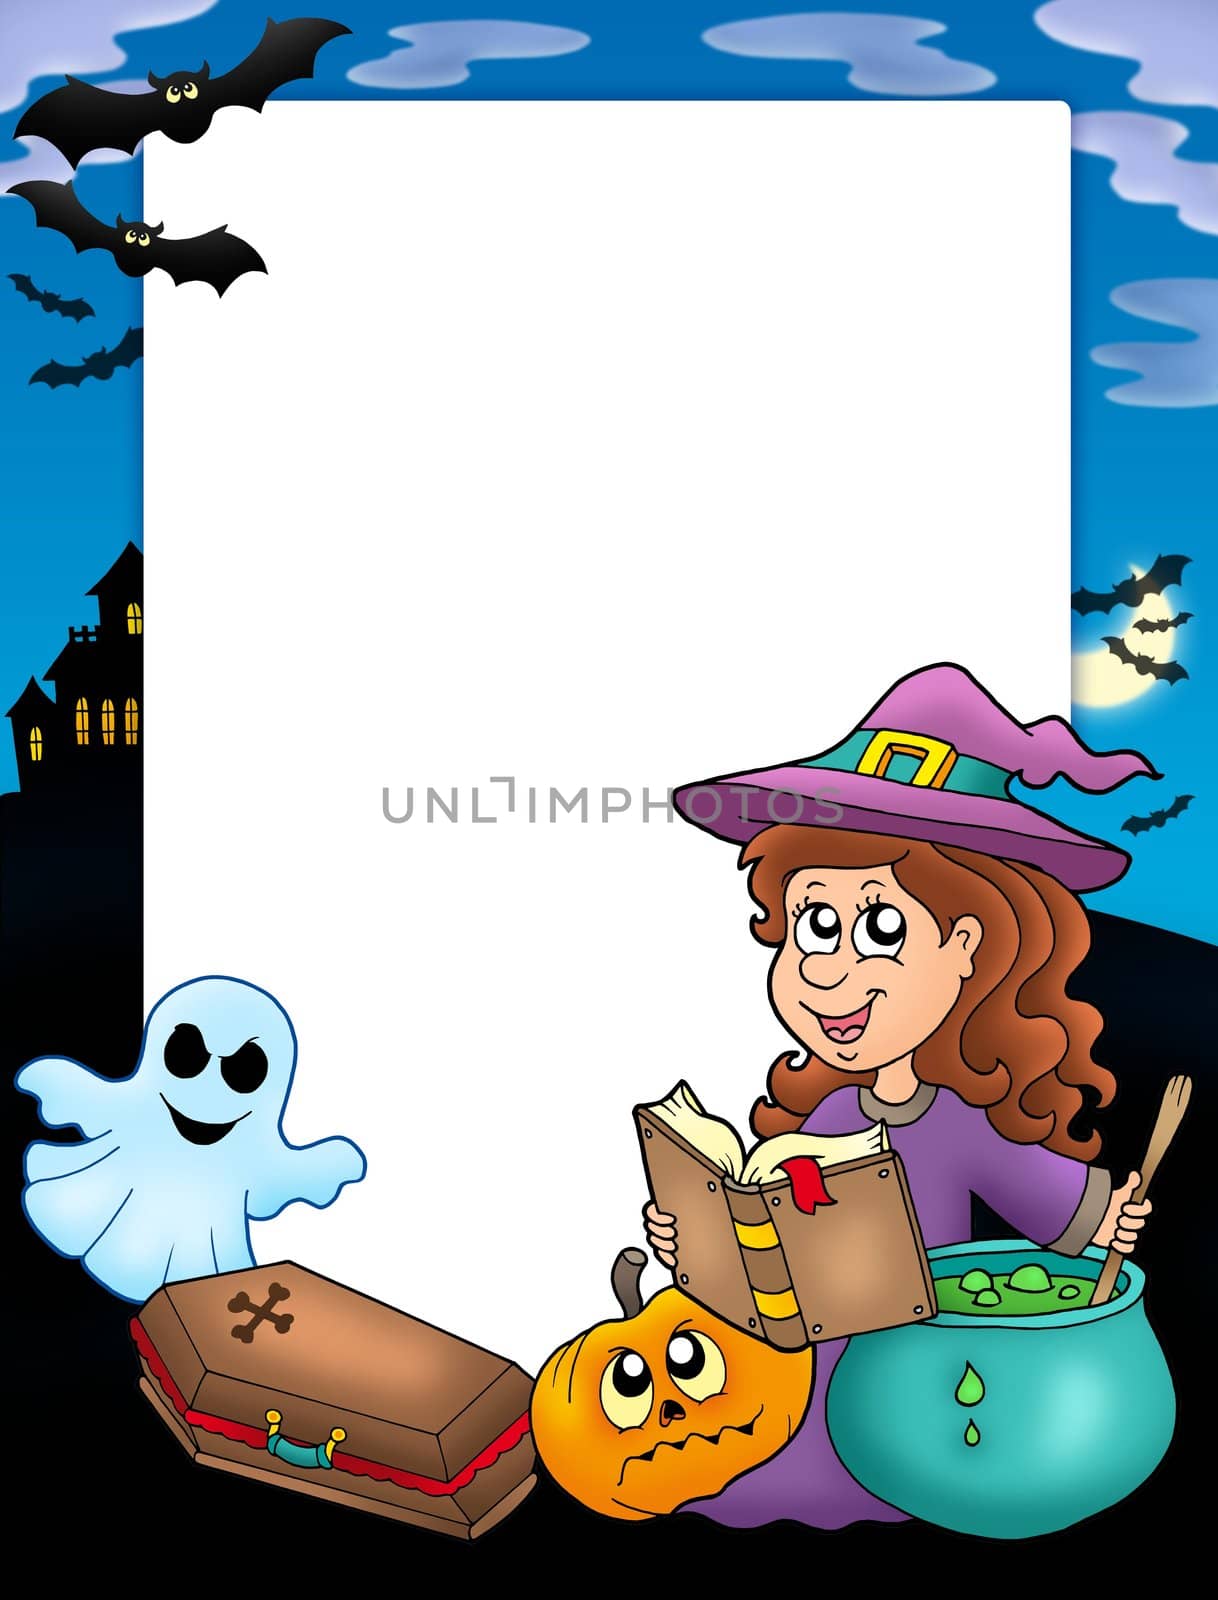 Halloween frame 4 with various objects - color illustration.